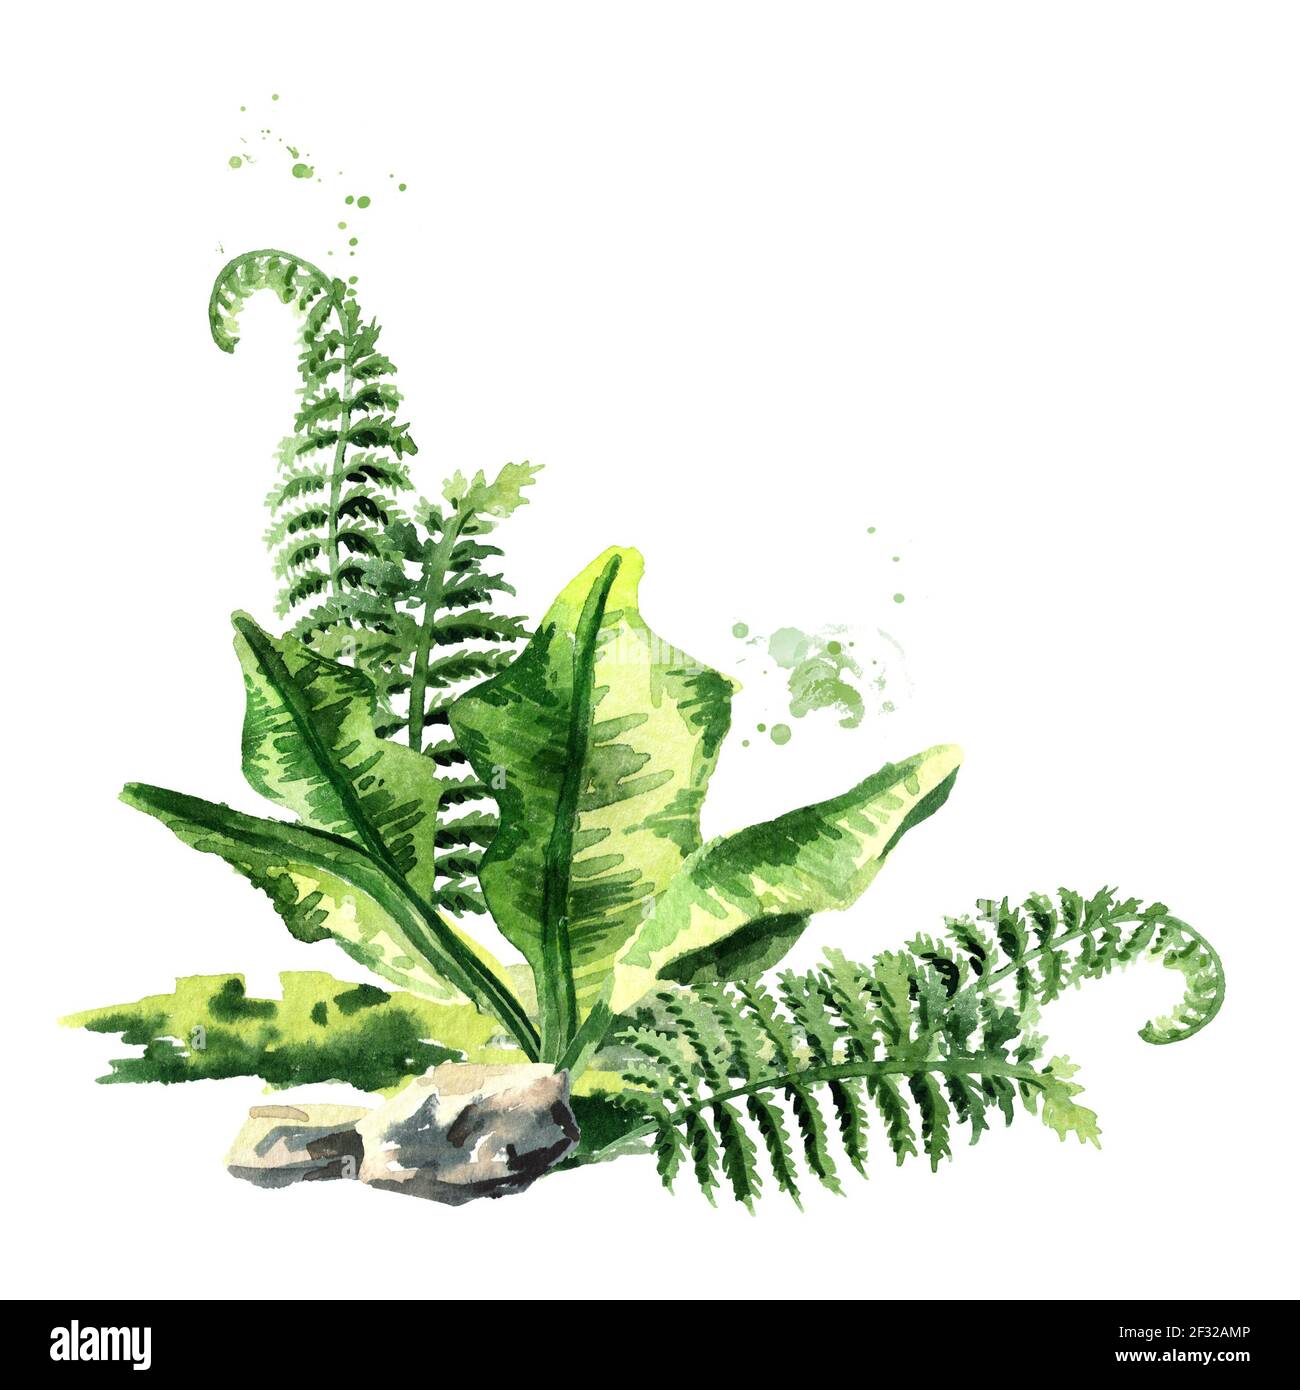 Prehistoric plants composition. Watercolor hand drawn illustration, isolated  on white background Stock Photo